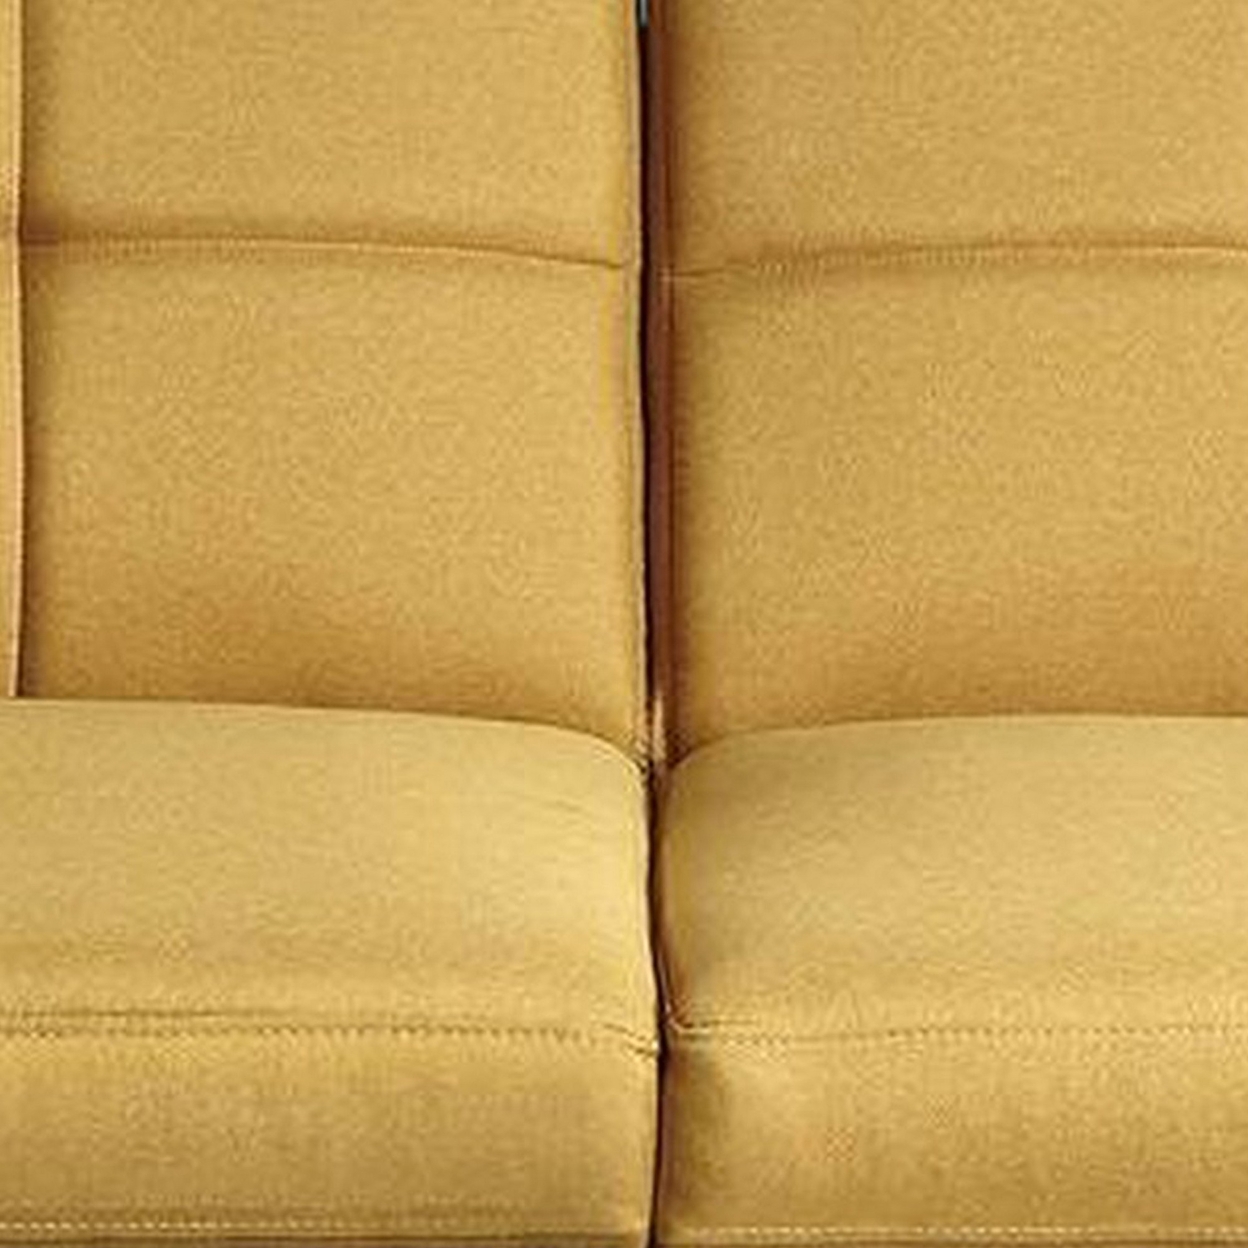 Gina 71 Inch Adjustable Futon Sofa Bed, Tufted, Tapered Legs, Mustard